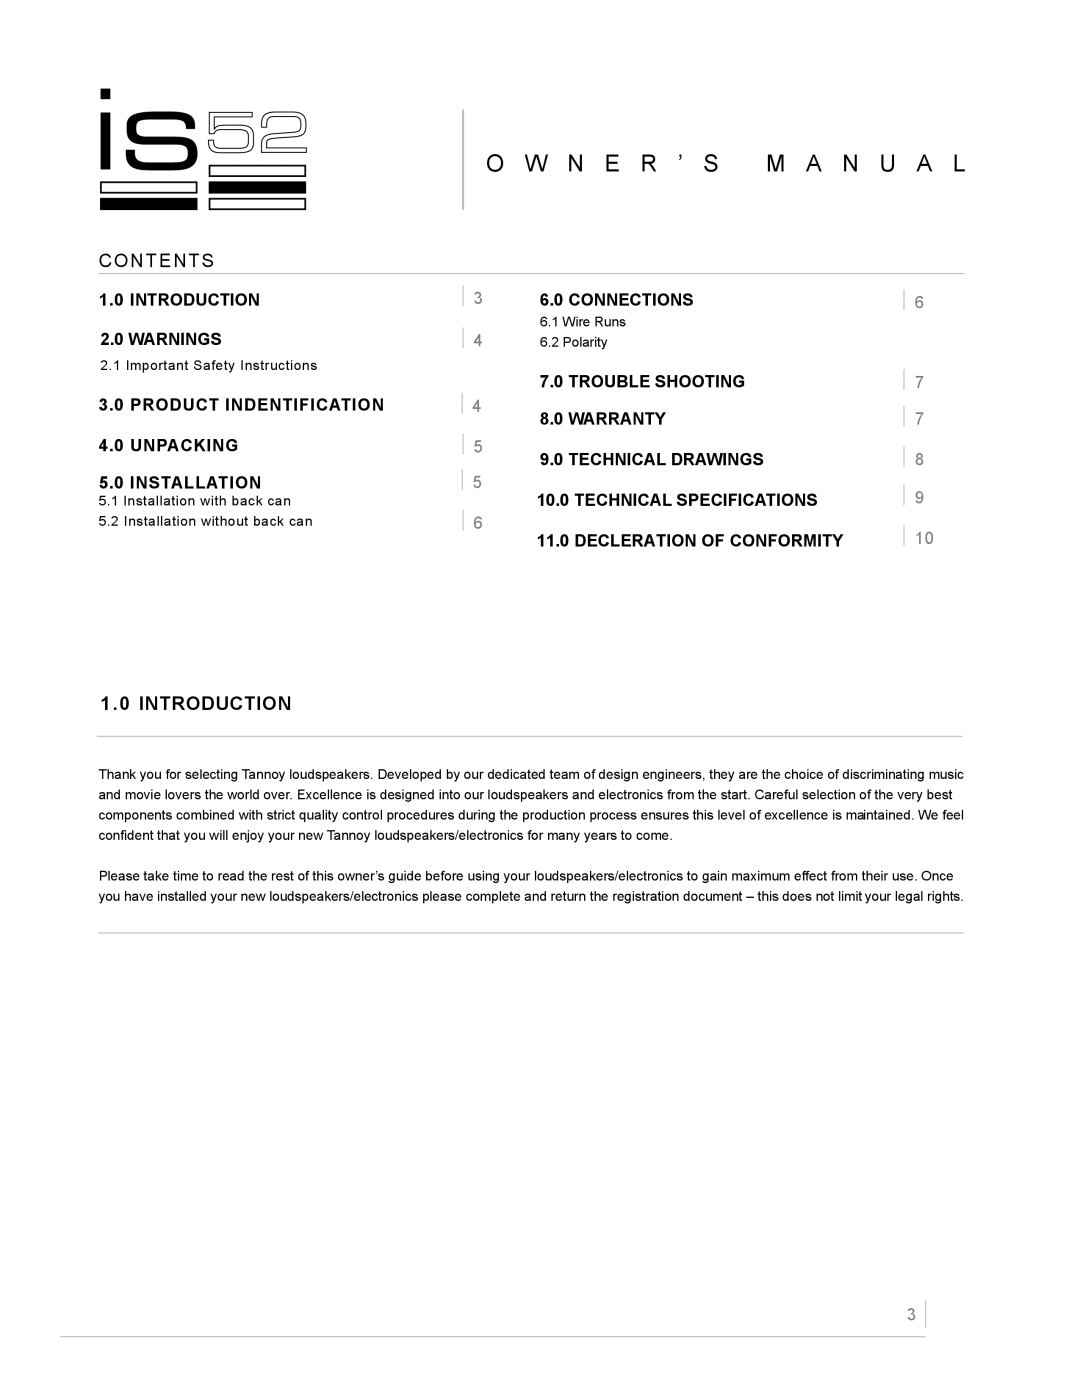 TOA Electronics IS52 owner manual O W N E R ’ S M A N U A L, Contents, Introduction 